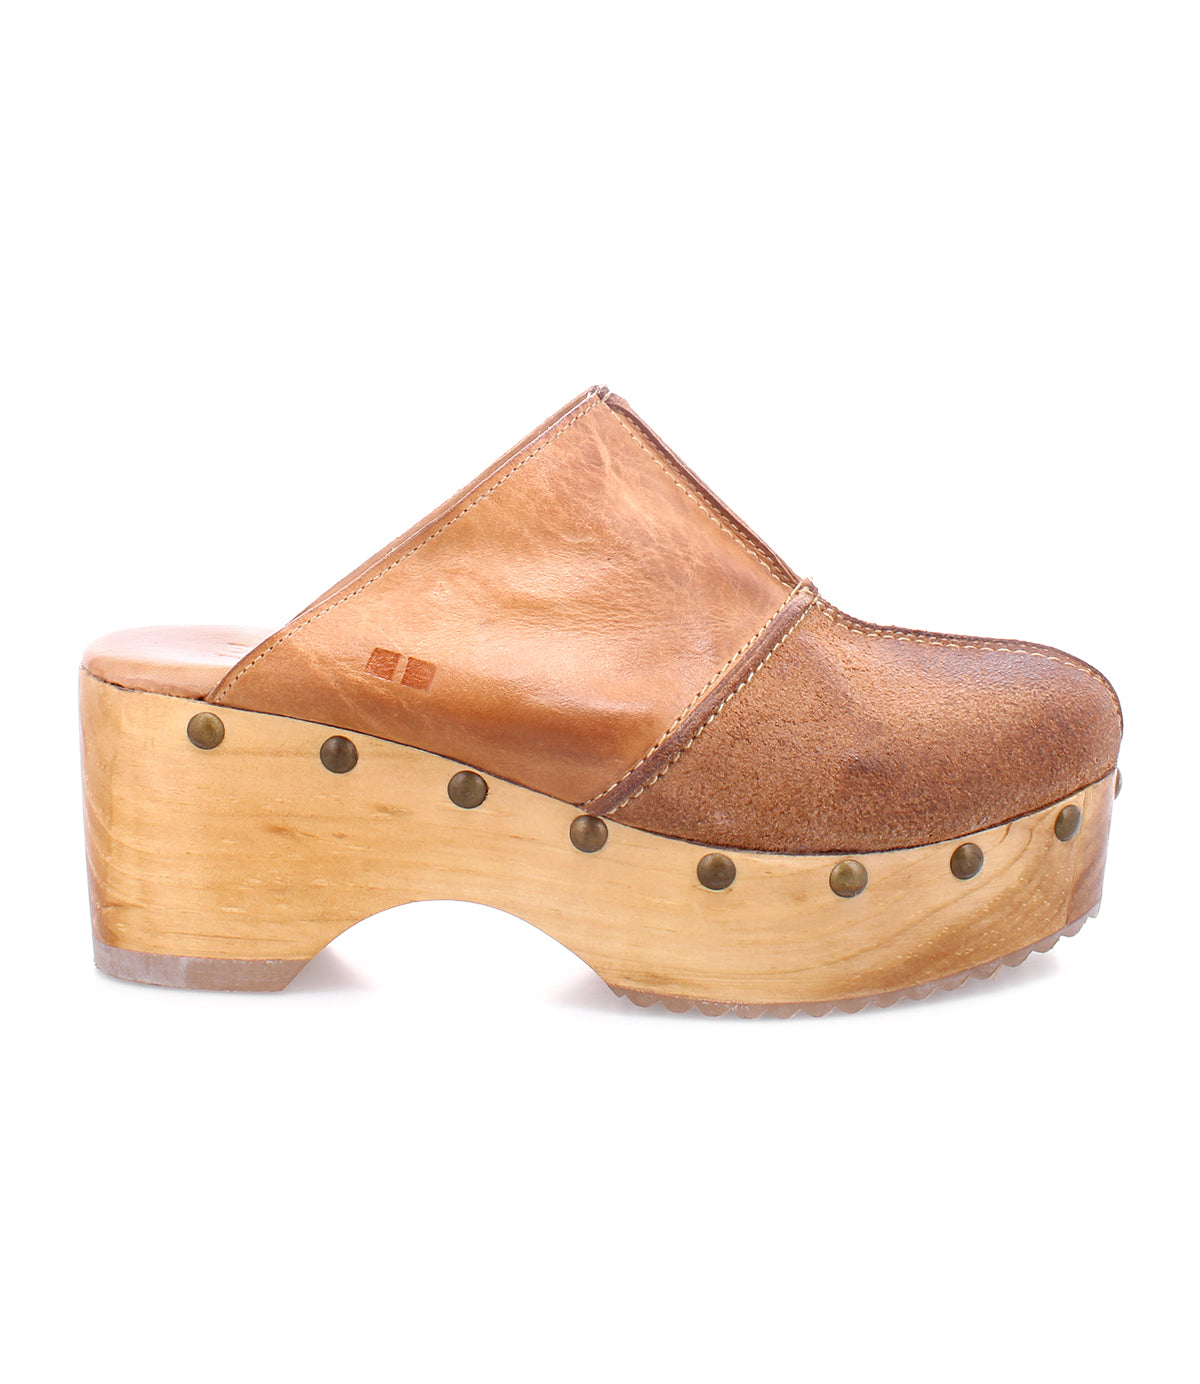 A sustainable wood clog for women called Mista from the brand Bed Stu.